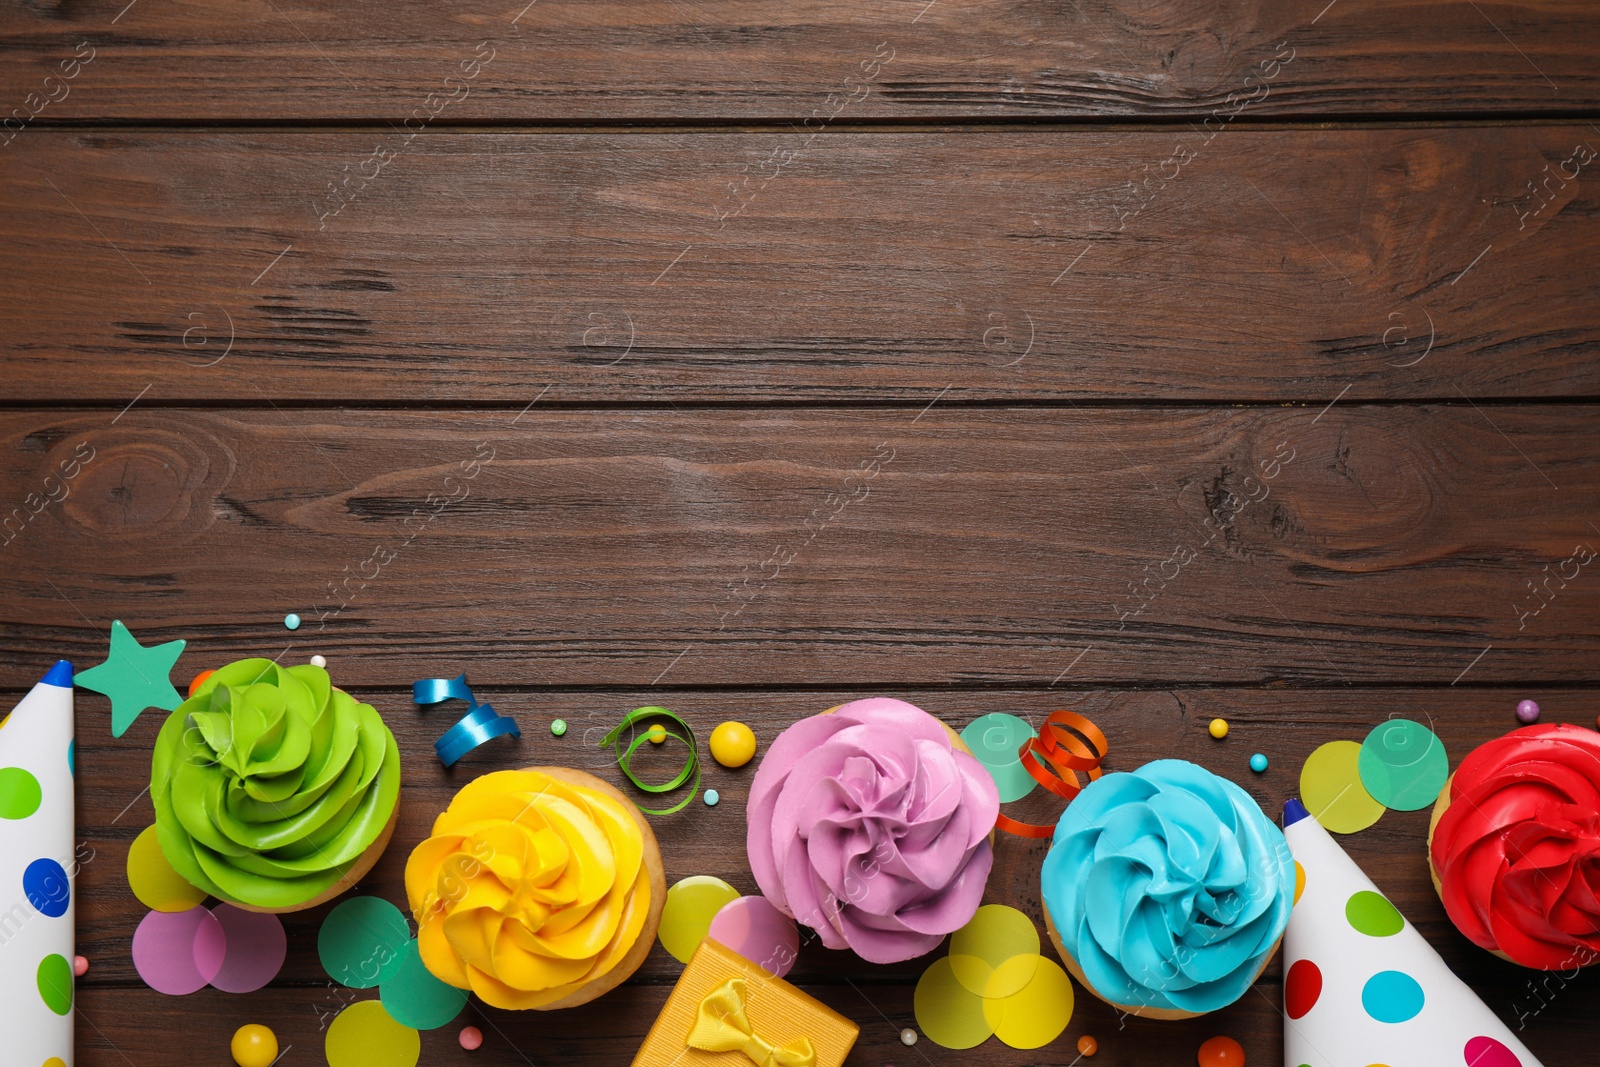 Photo of Flat lay composition with colorful birthday cupcakes on wooden table. Space for text